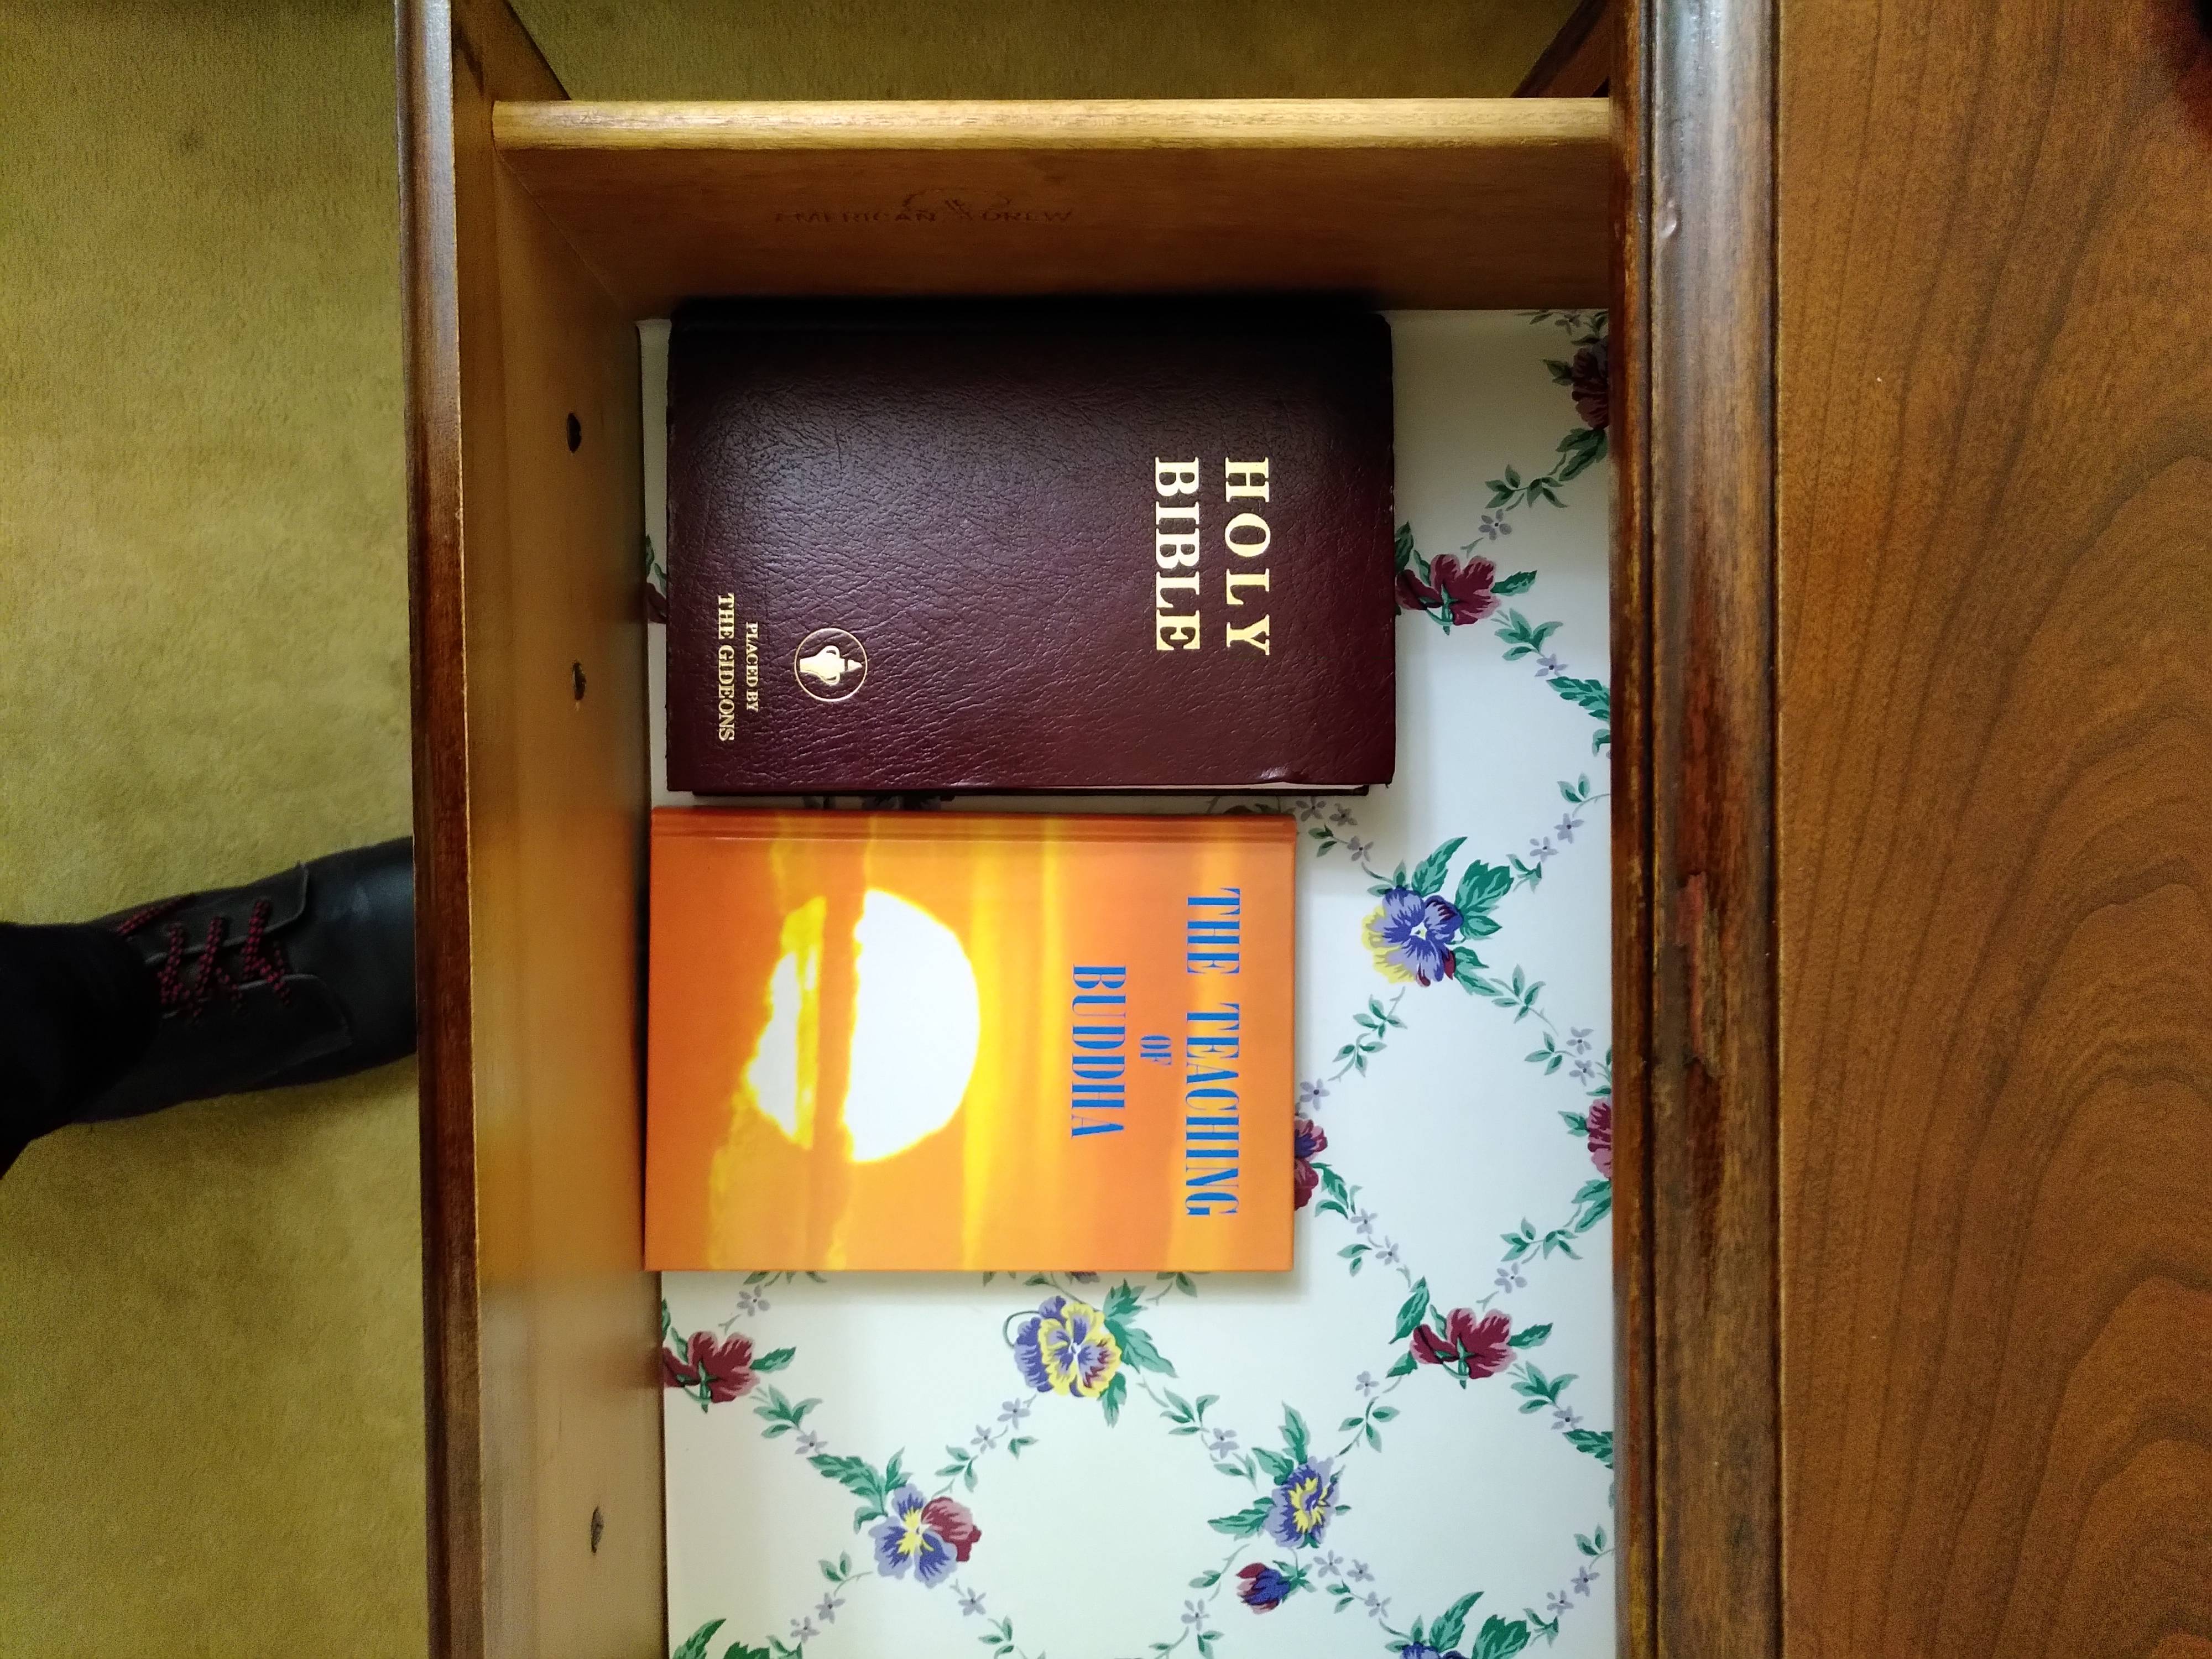 A drawer containing the bible and another book with the title "The teaching of the Buddha".